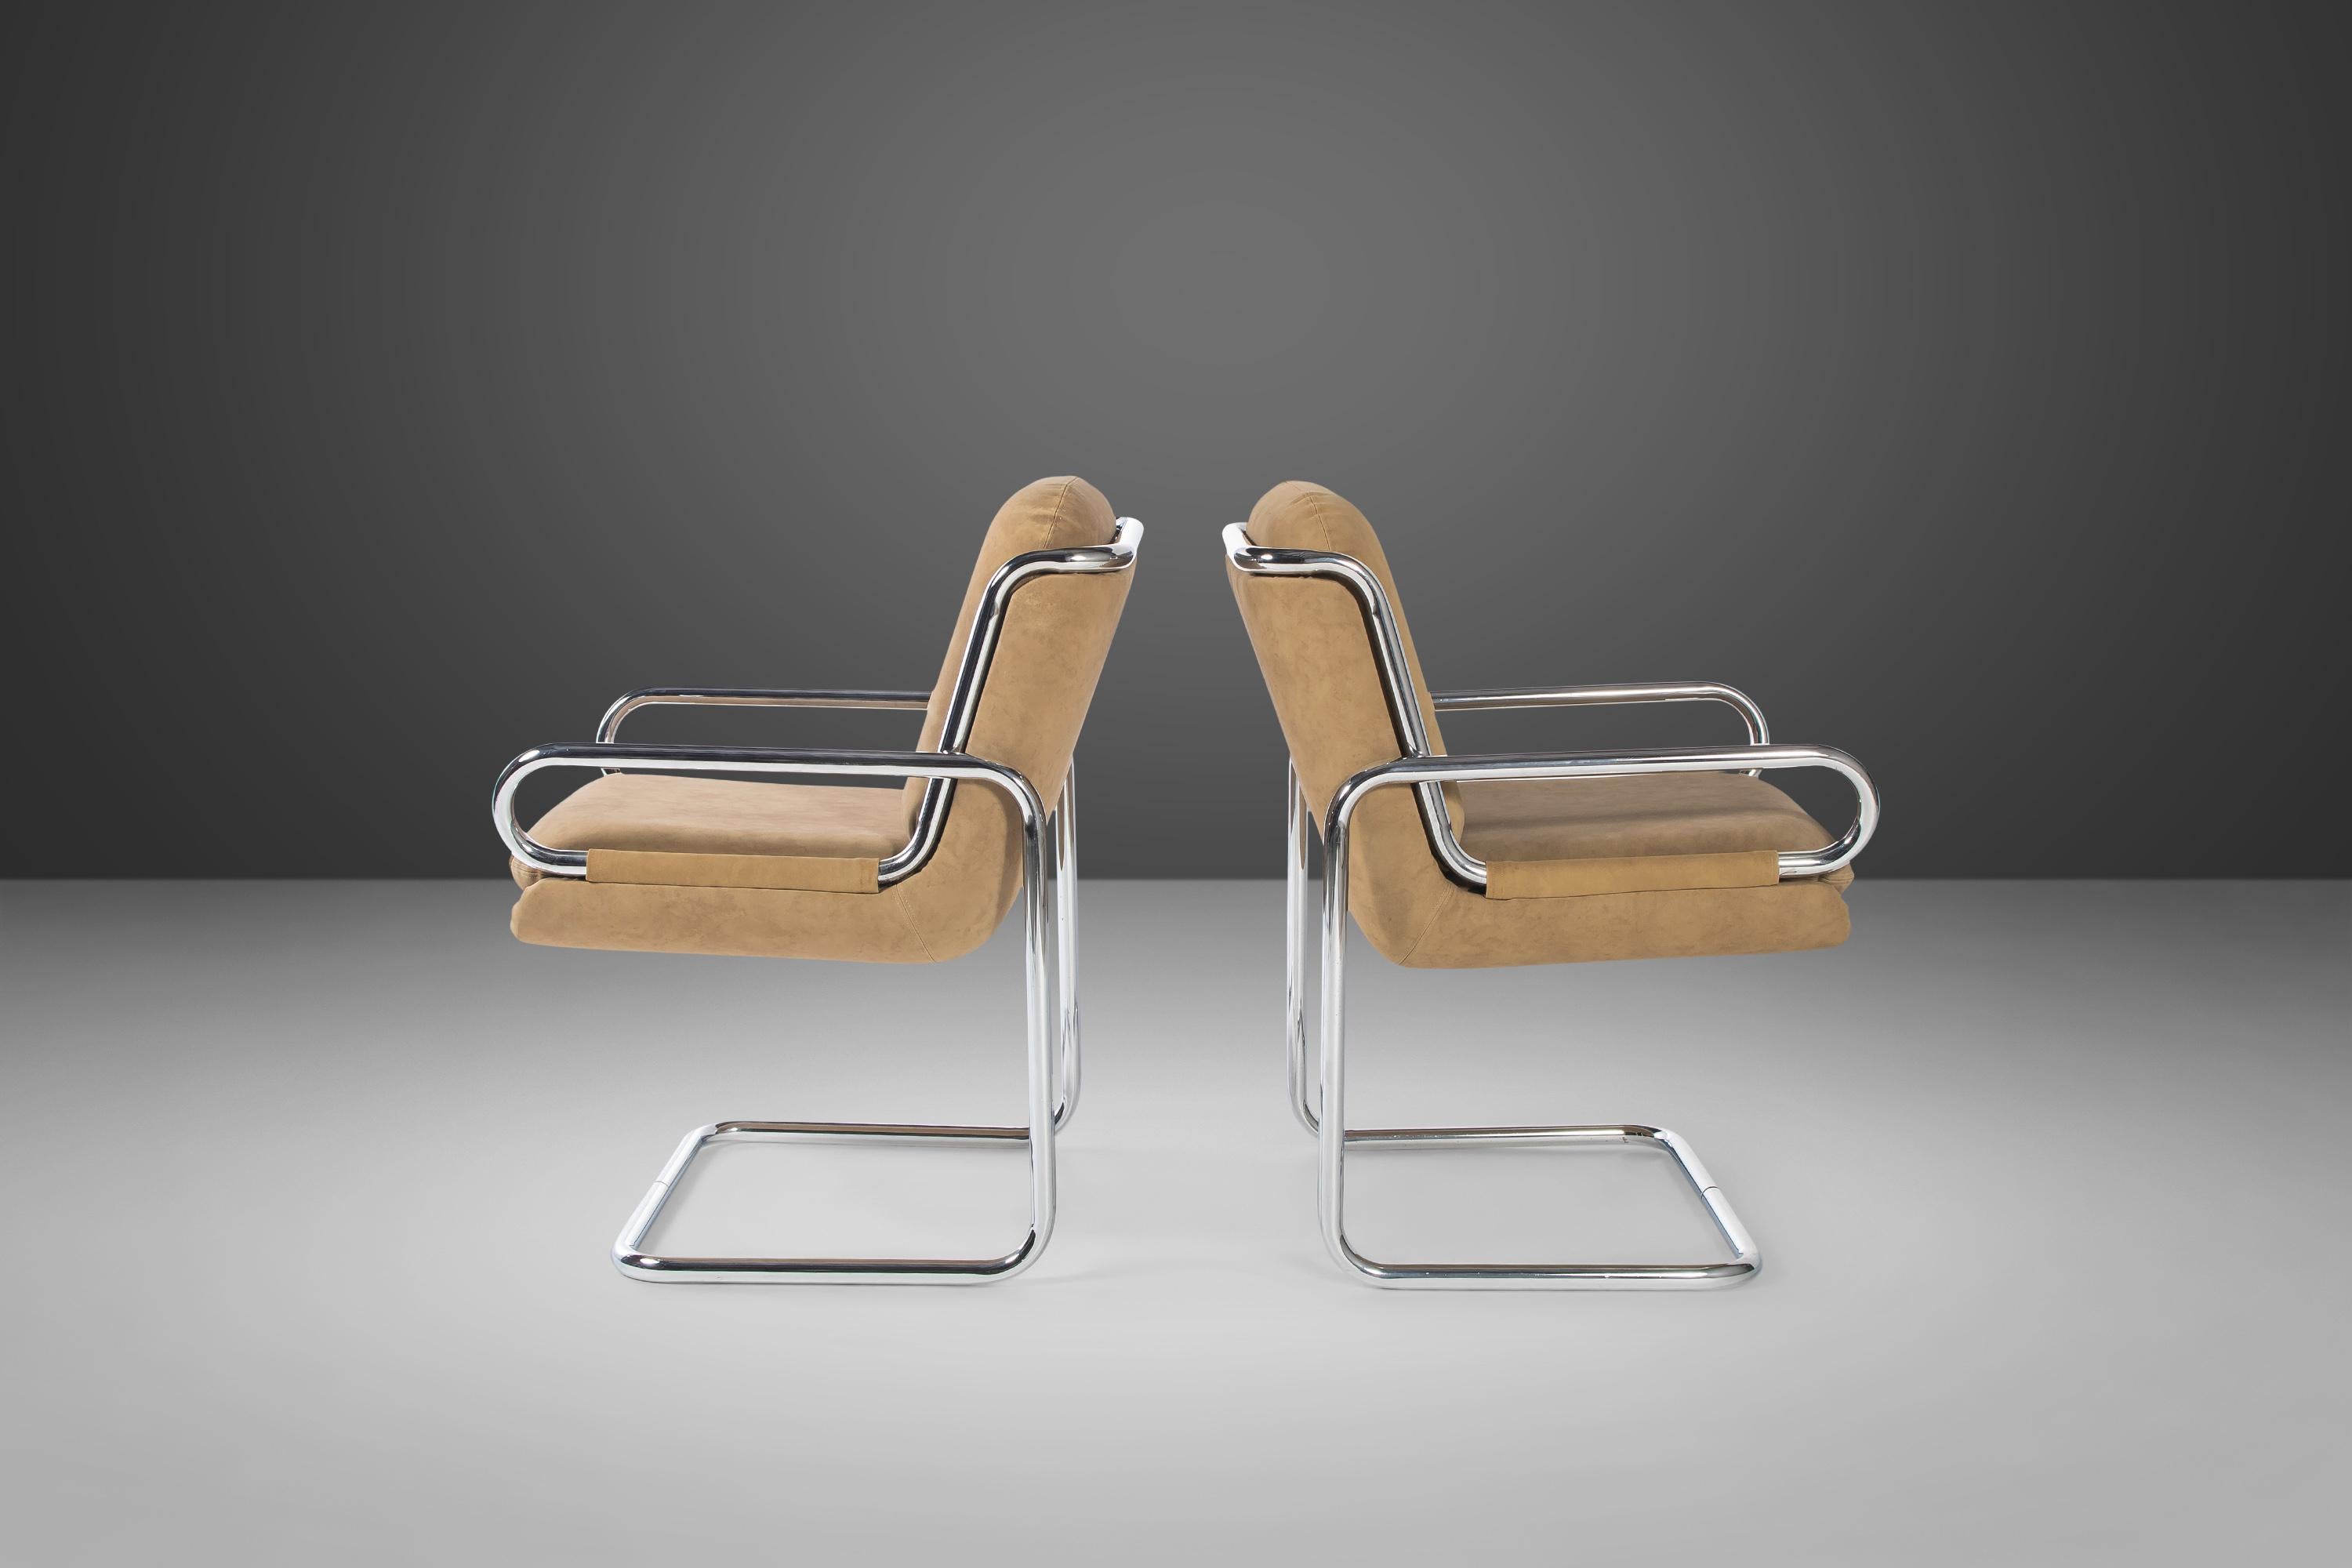 Pair of Lounge Chairs Tubular Chrome Lounge Chairs by Dunbar Dux, c. 1970s For Sale 5